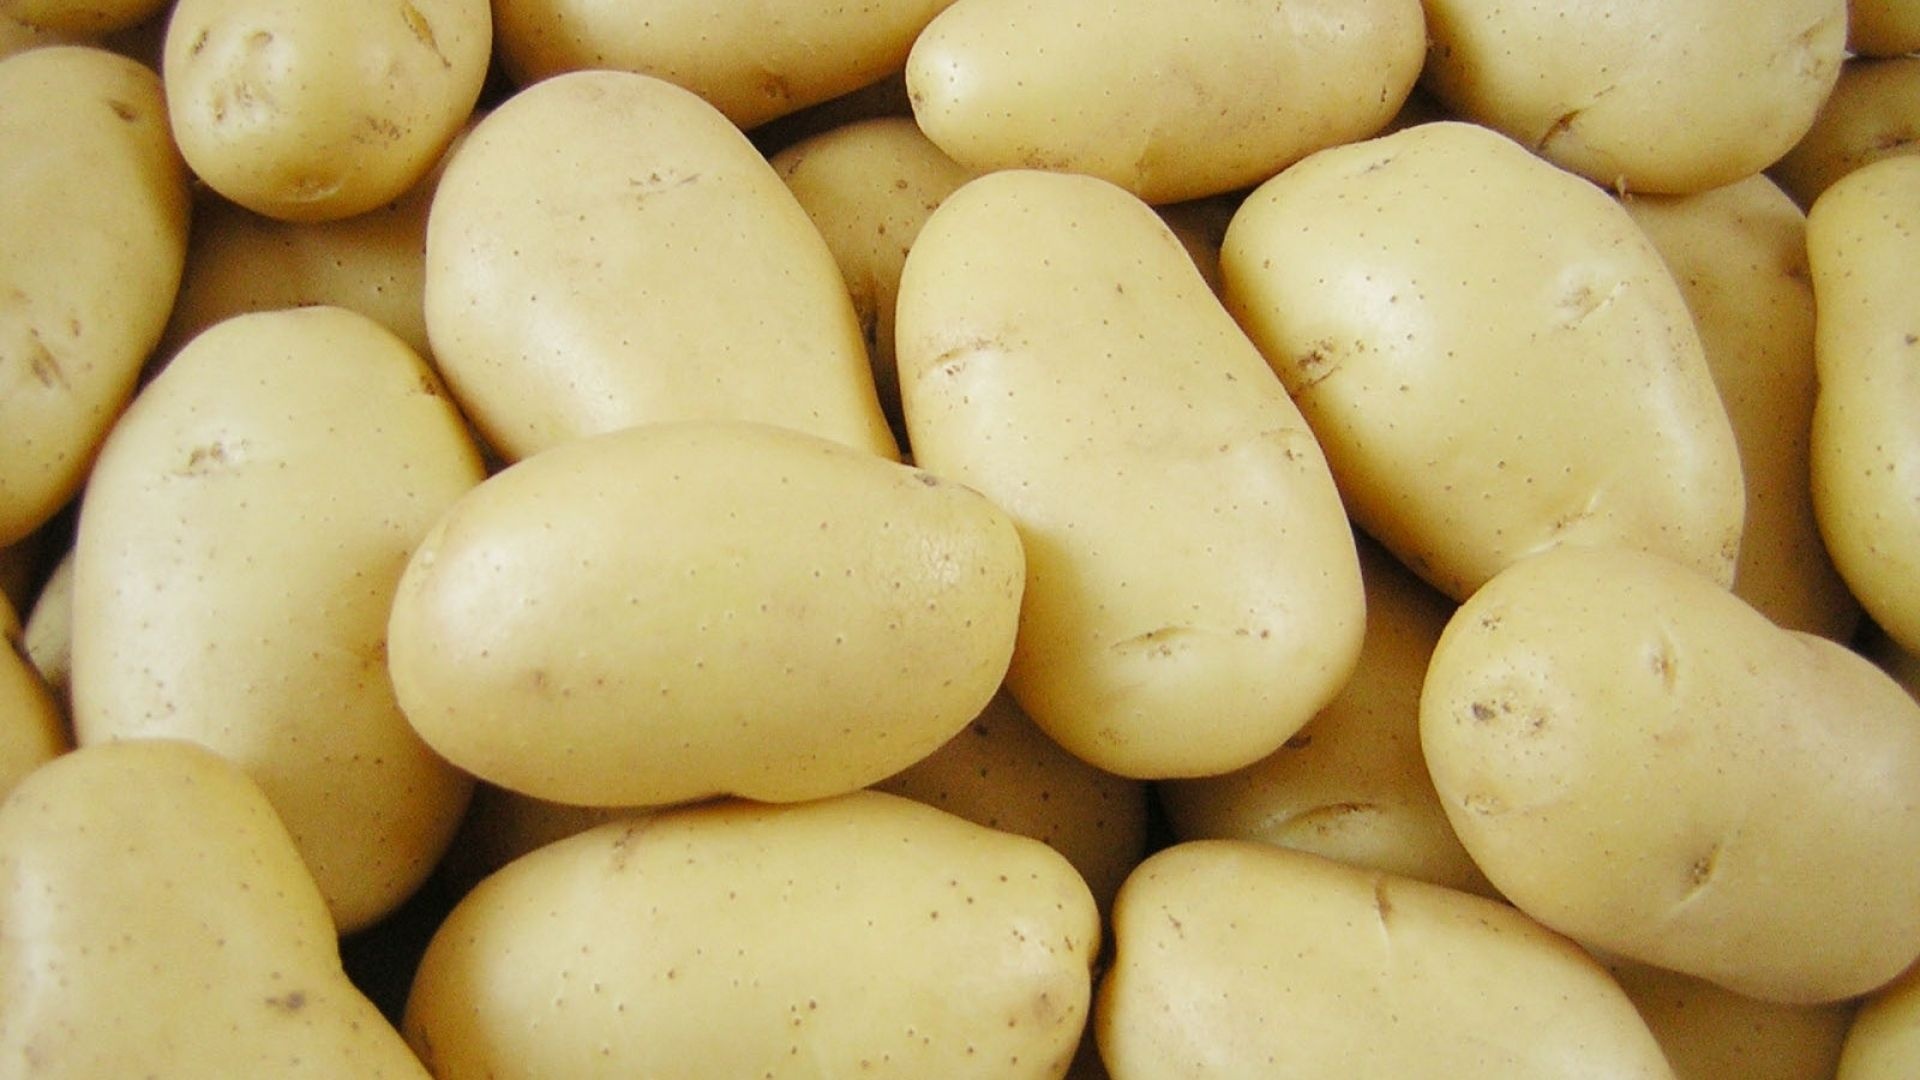 Potato wallpapers, High-quality images, Diverse options, Perfect for any device, 1920x1080 Full HD Desktop